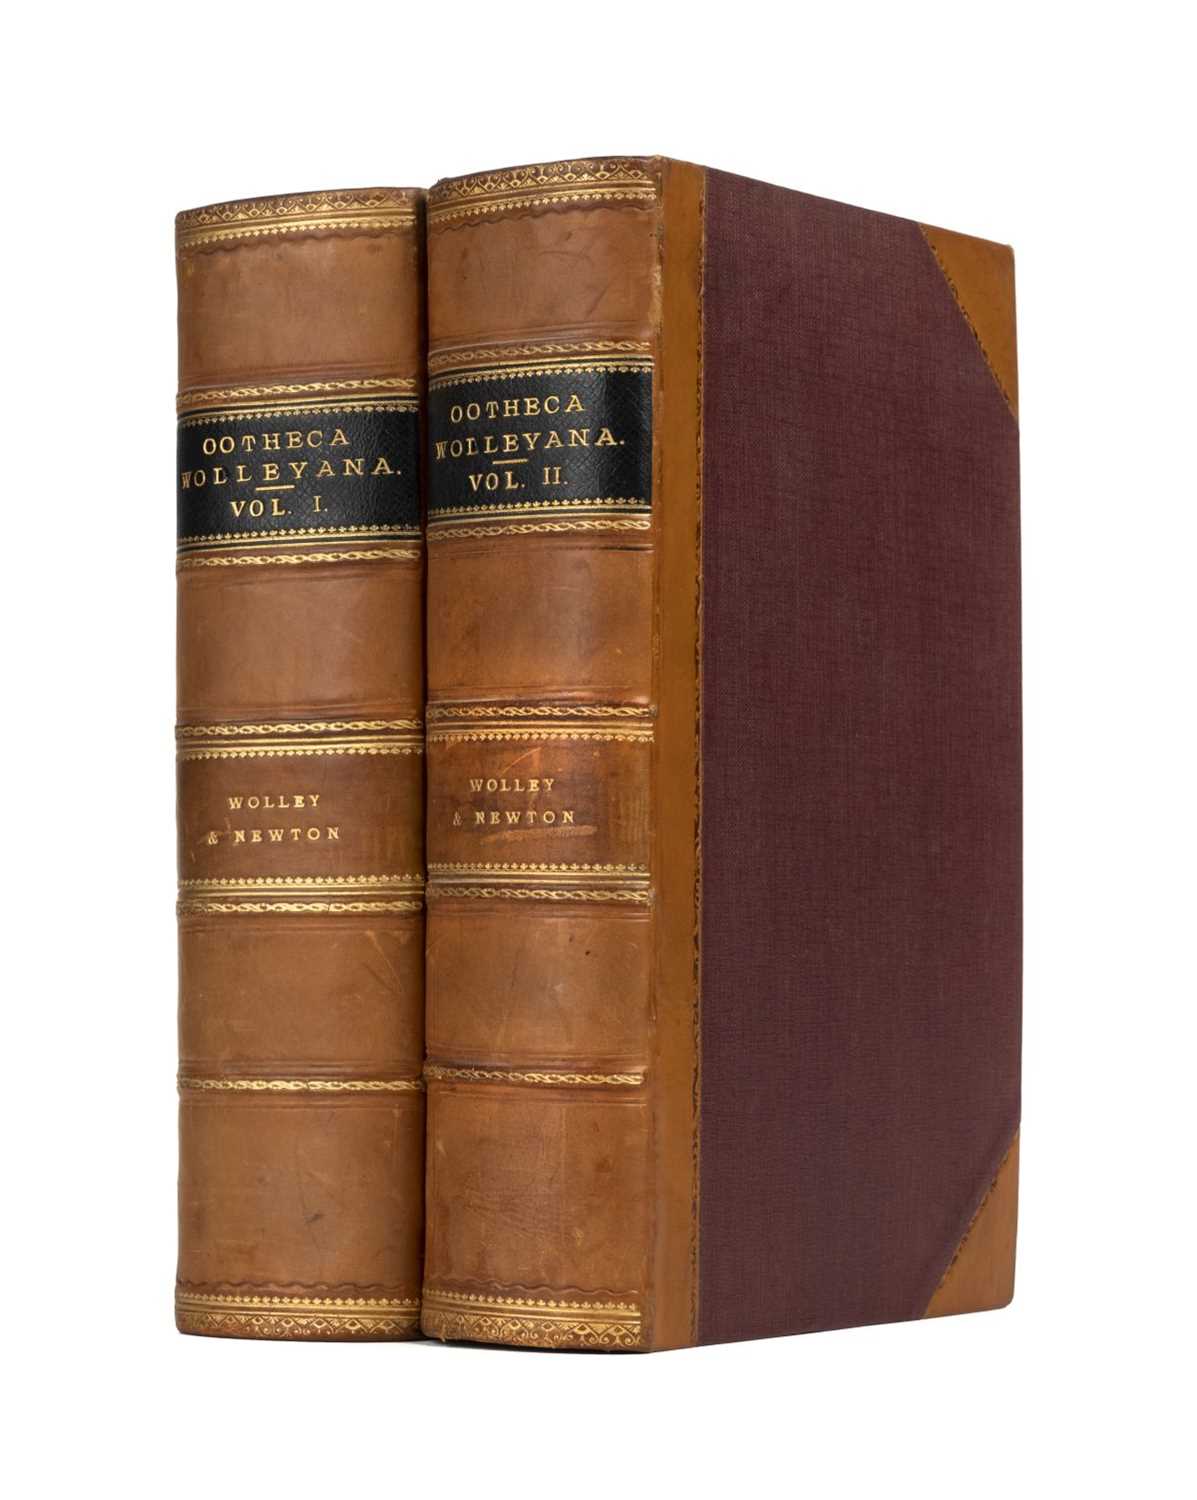 Lot 271 - Wolley (John). Ootheca Wolleyana, 2 volumes, 1st edition, 1864-1907